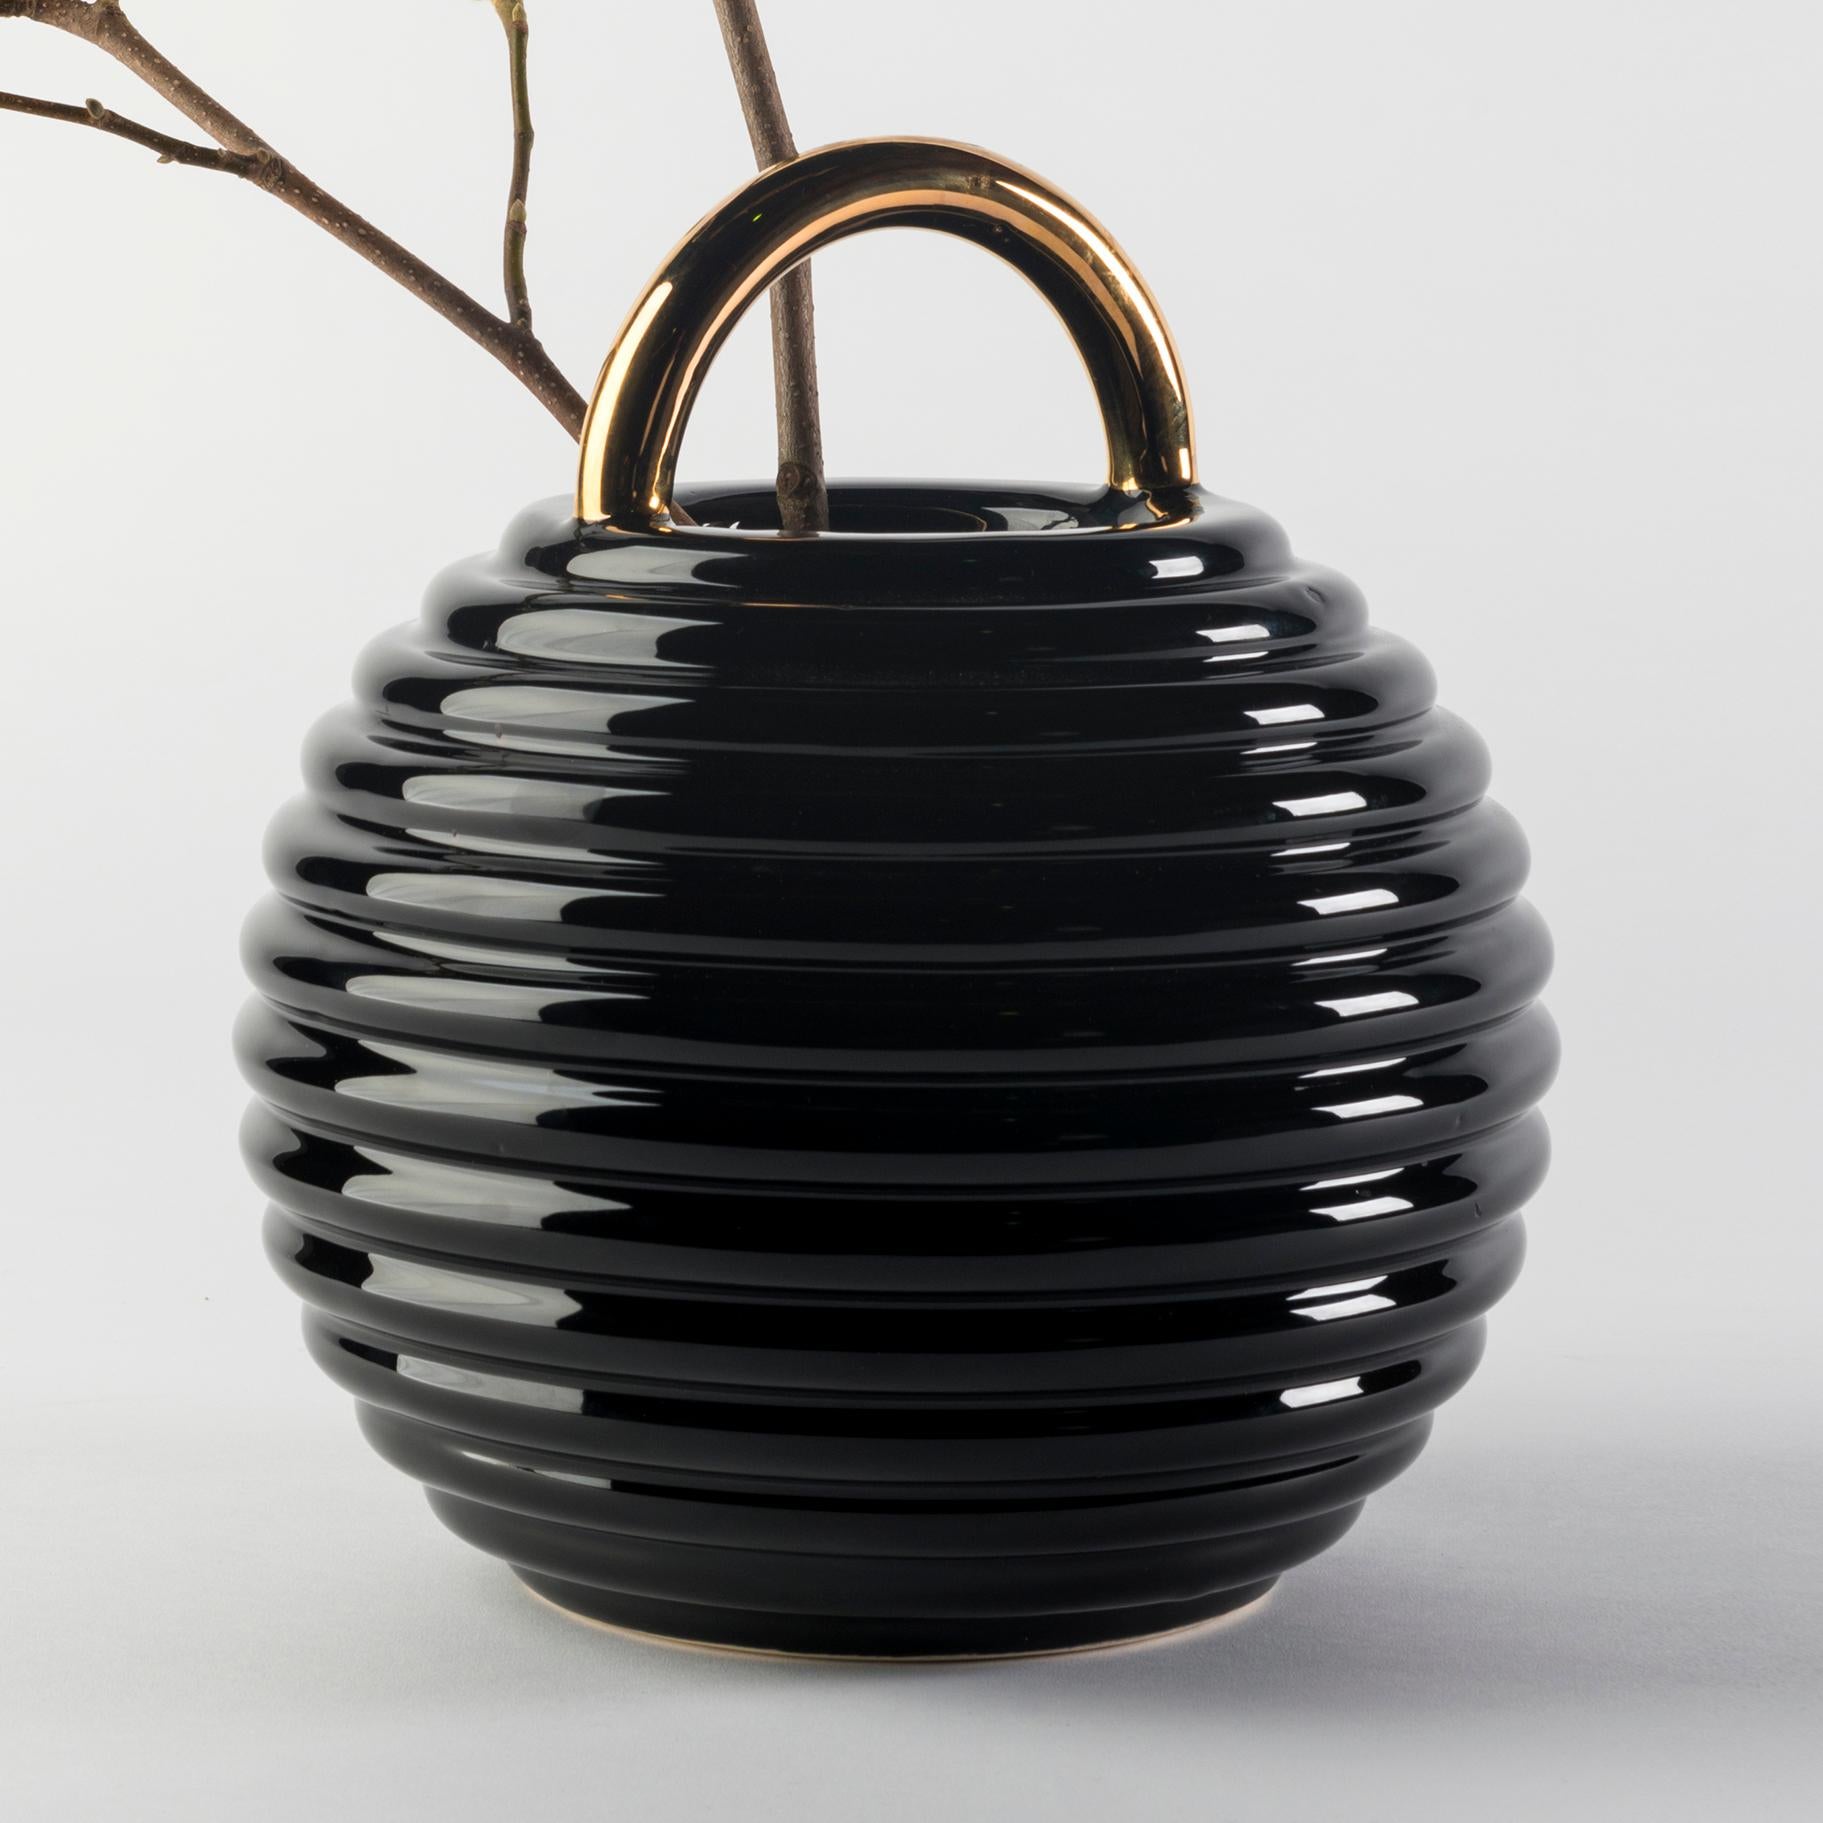 Ceramic vase designed by Stephen Burks 

Black enamelled ceramic vase with hand painted decorations in gold, platinum and copper.

The Grasso vases come in different finishes. The basic versions are either all in white or black with the handle